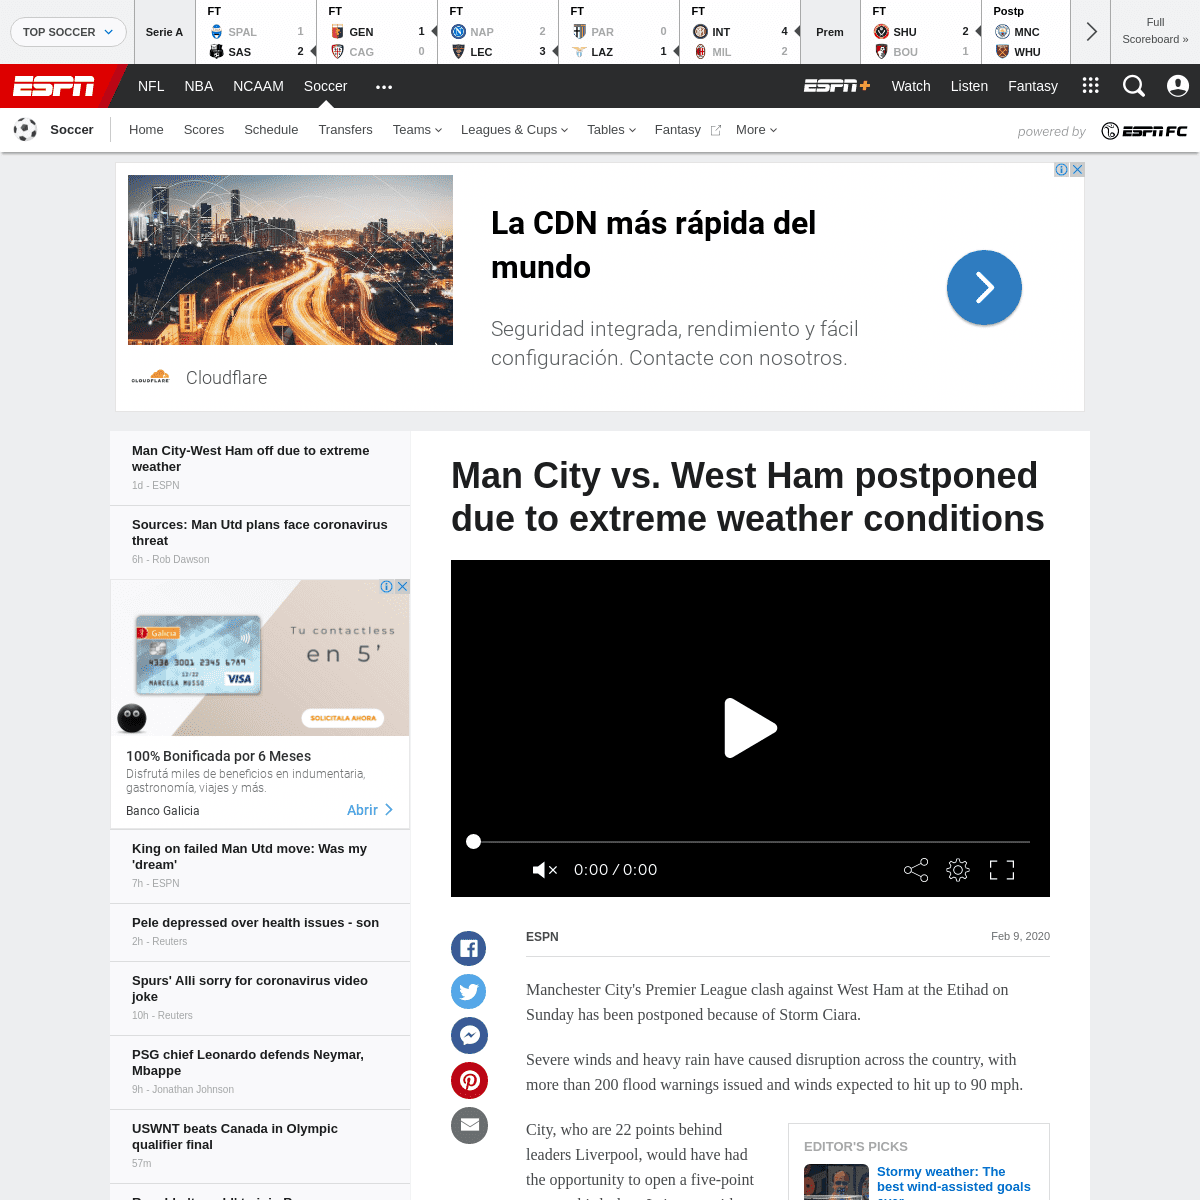 A complete backup of www.espn.com/soccer/manchester-city/story/4049661/man-city-vs-west-ham-postponed-due-to-extreme-weather-con